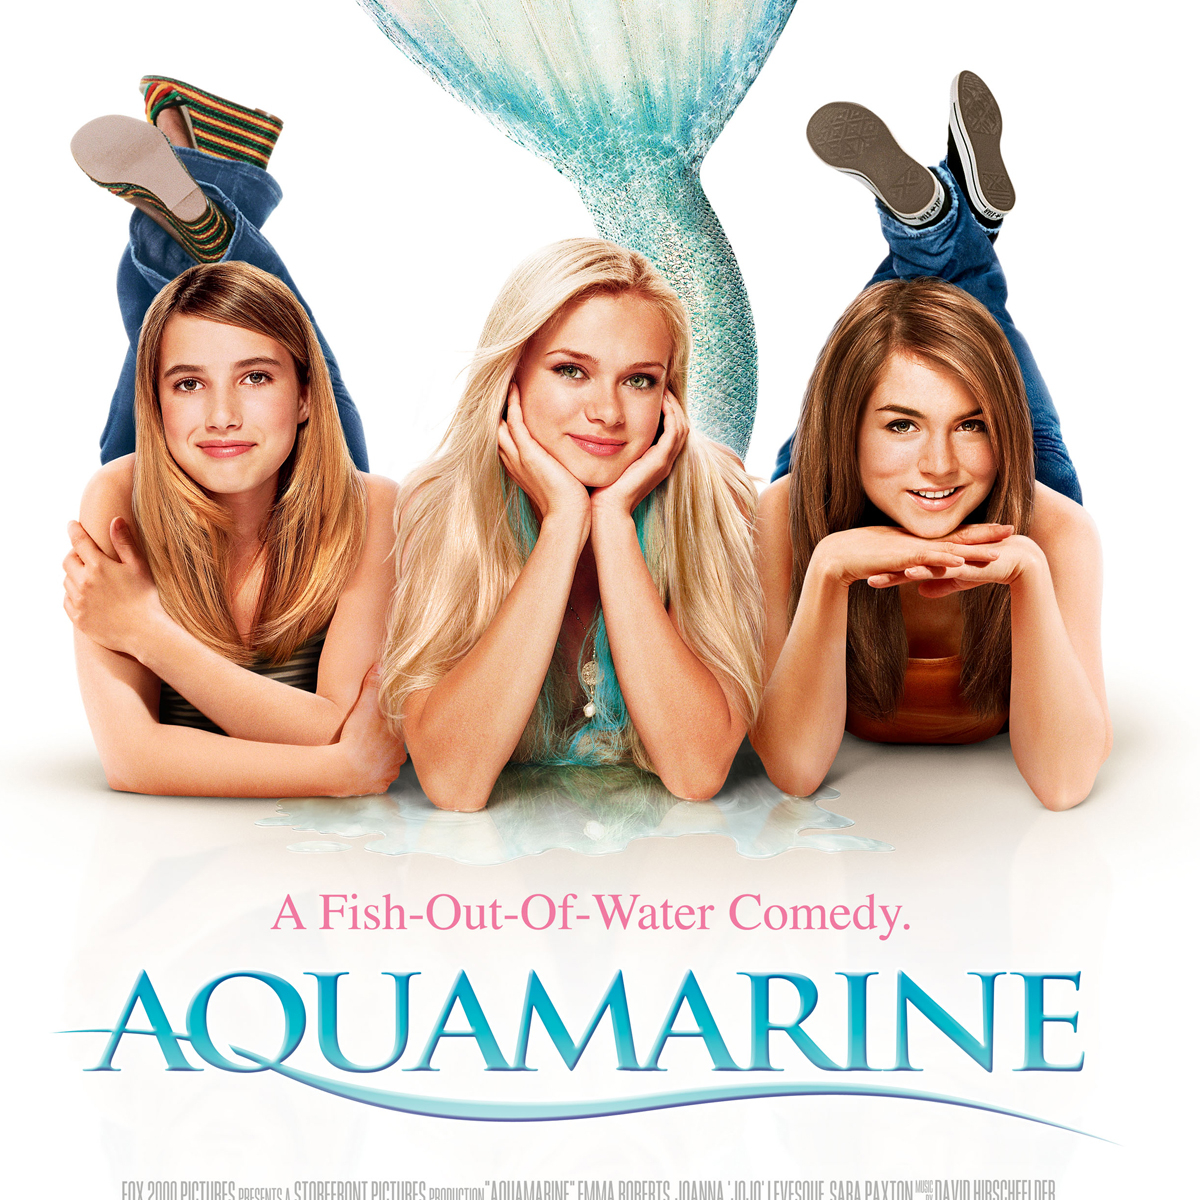 See the Stars of Aquamarine, Then & Now - E! Online